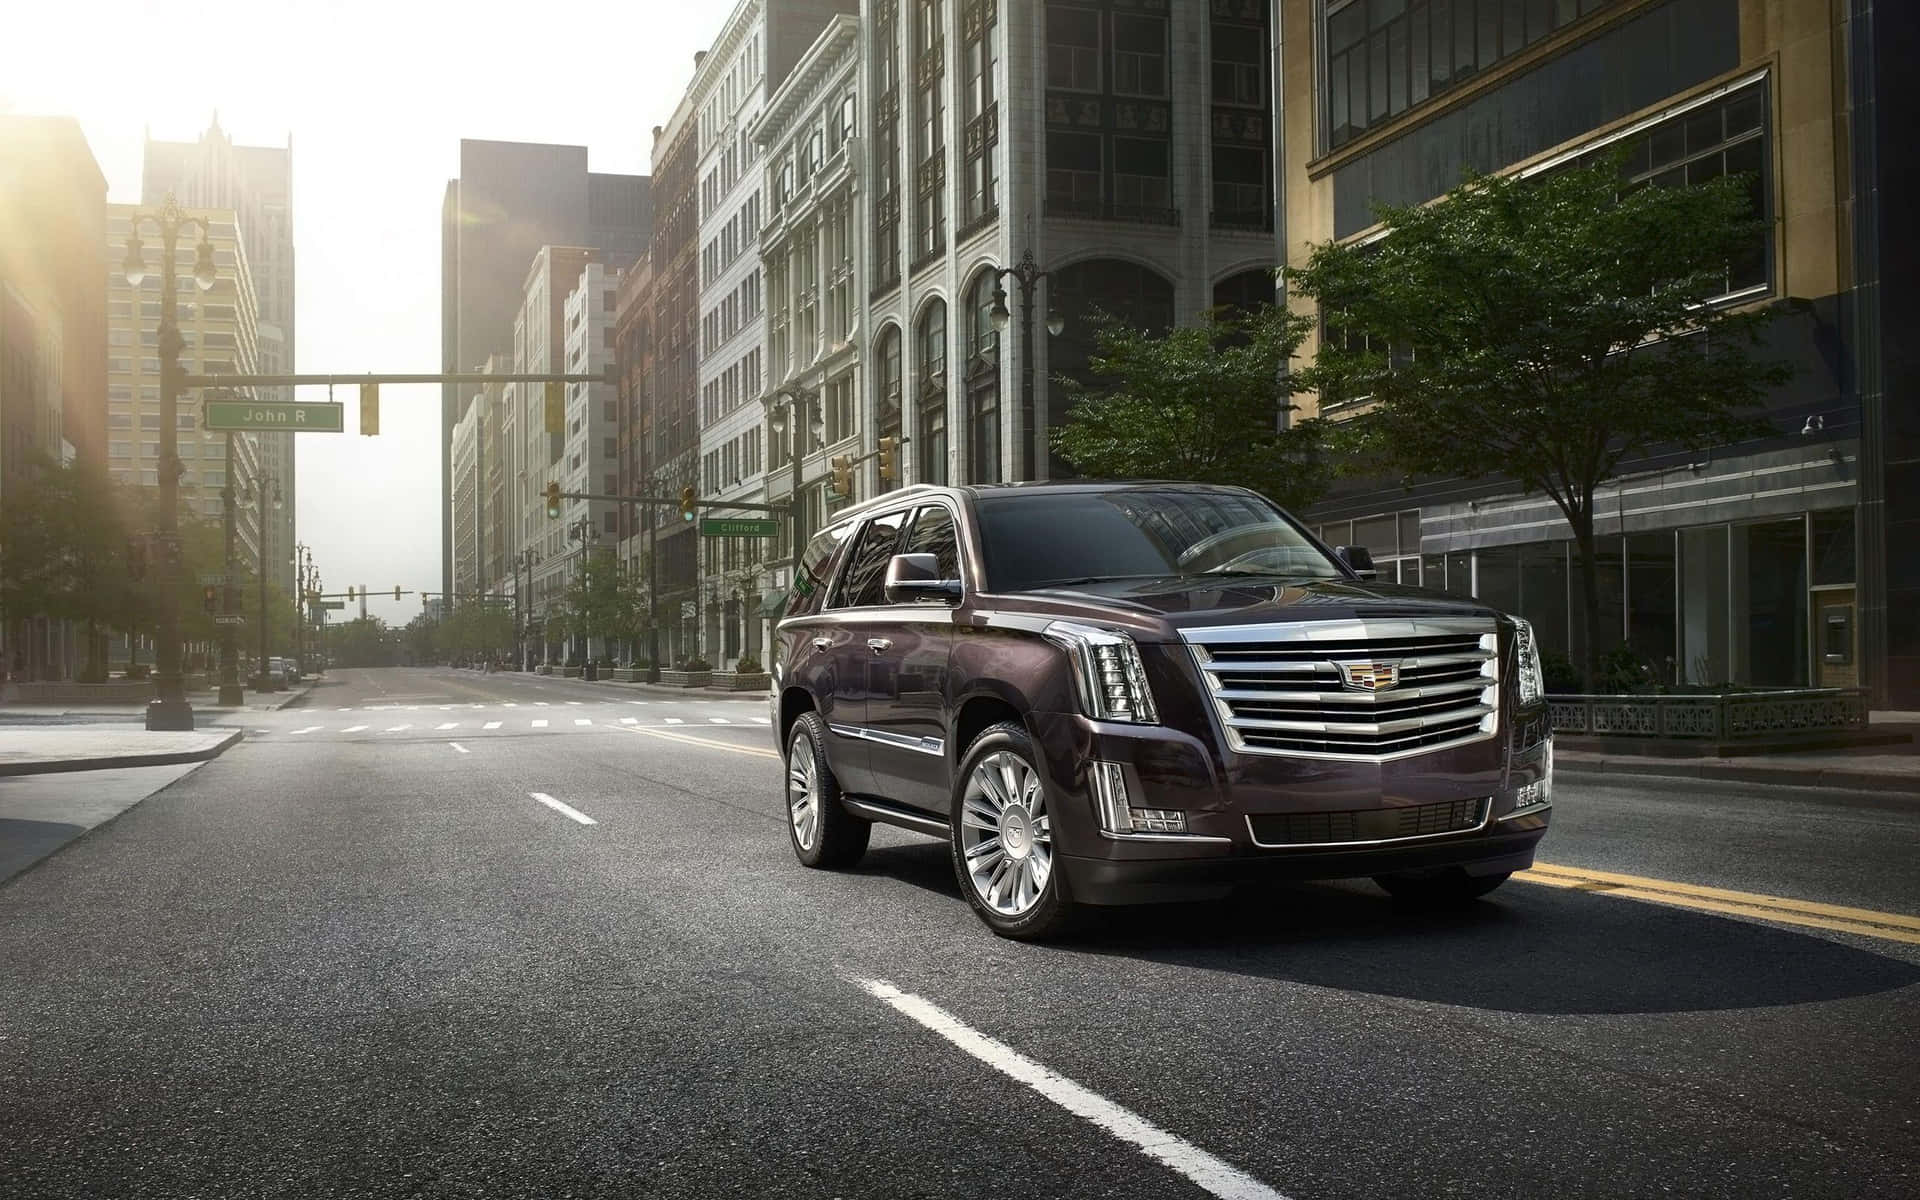 Experience Luxury with the Cadillac Escalade